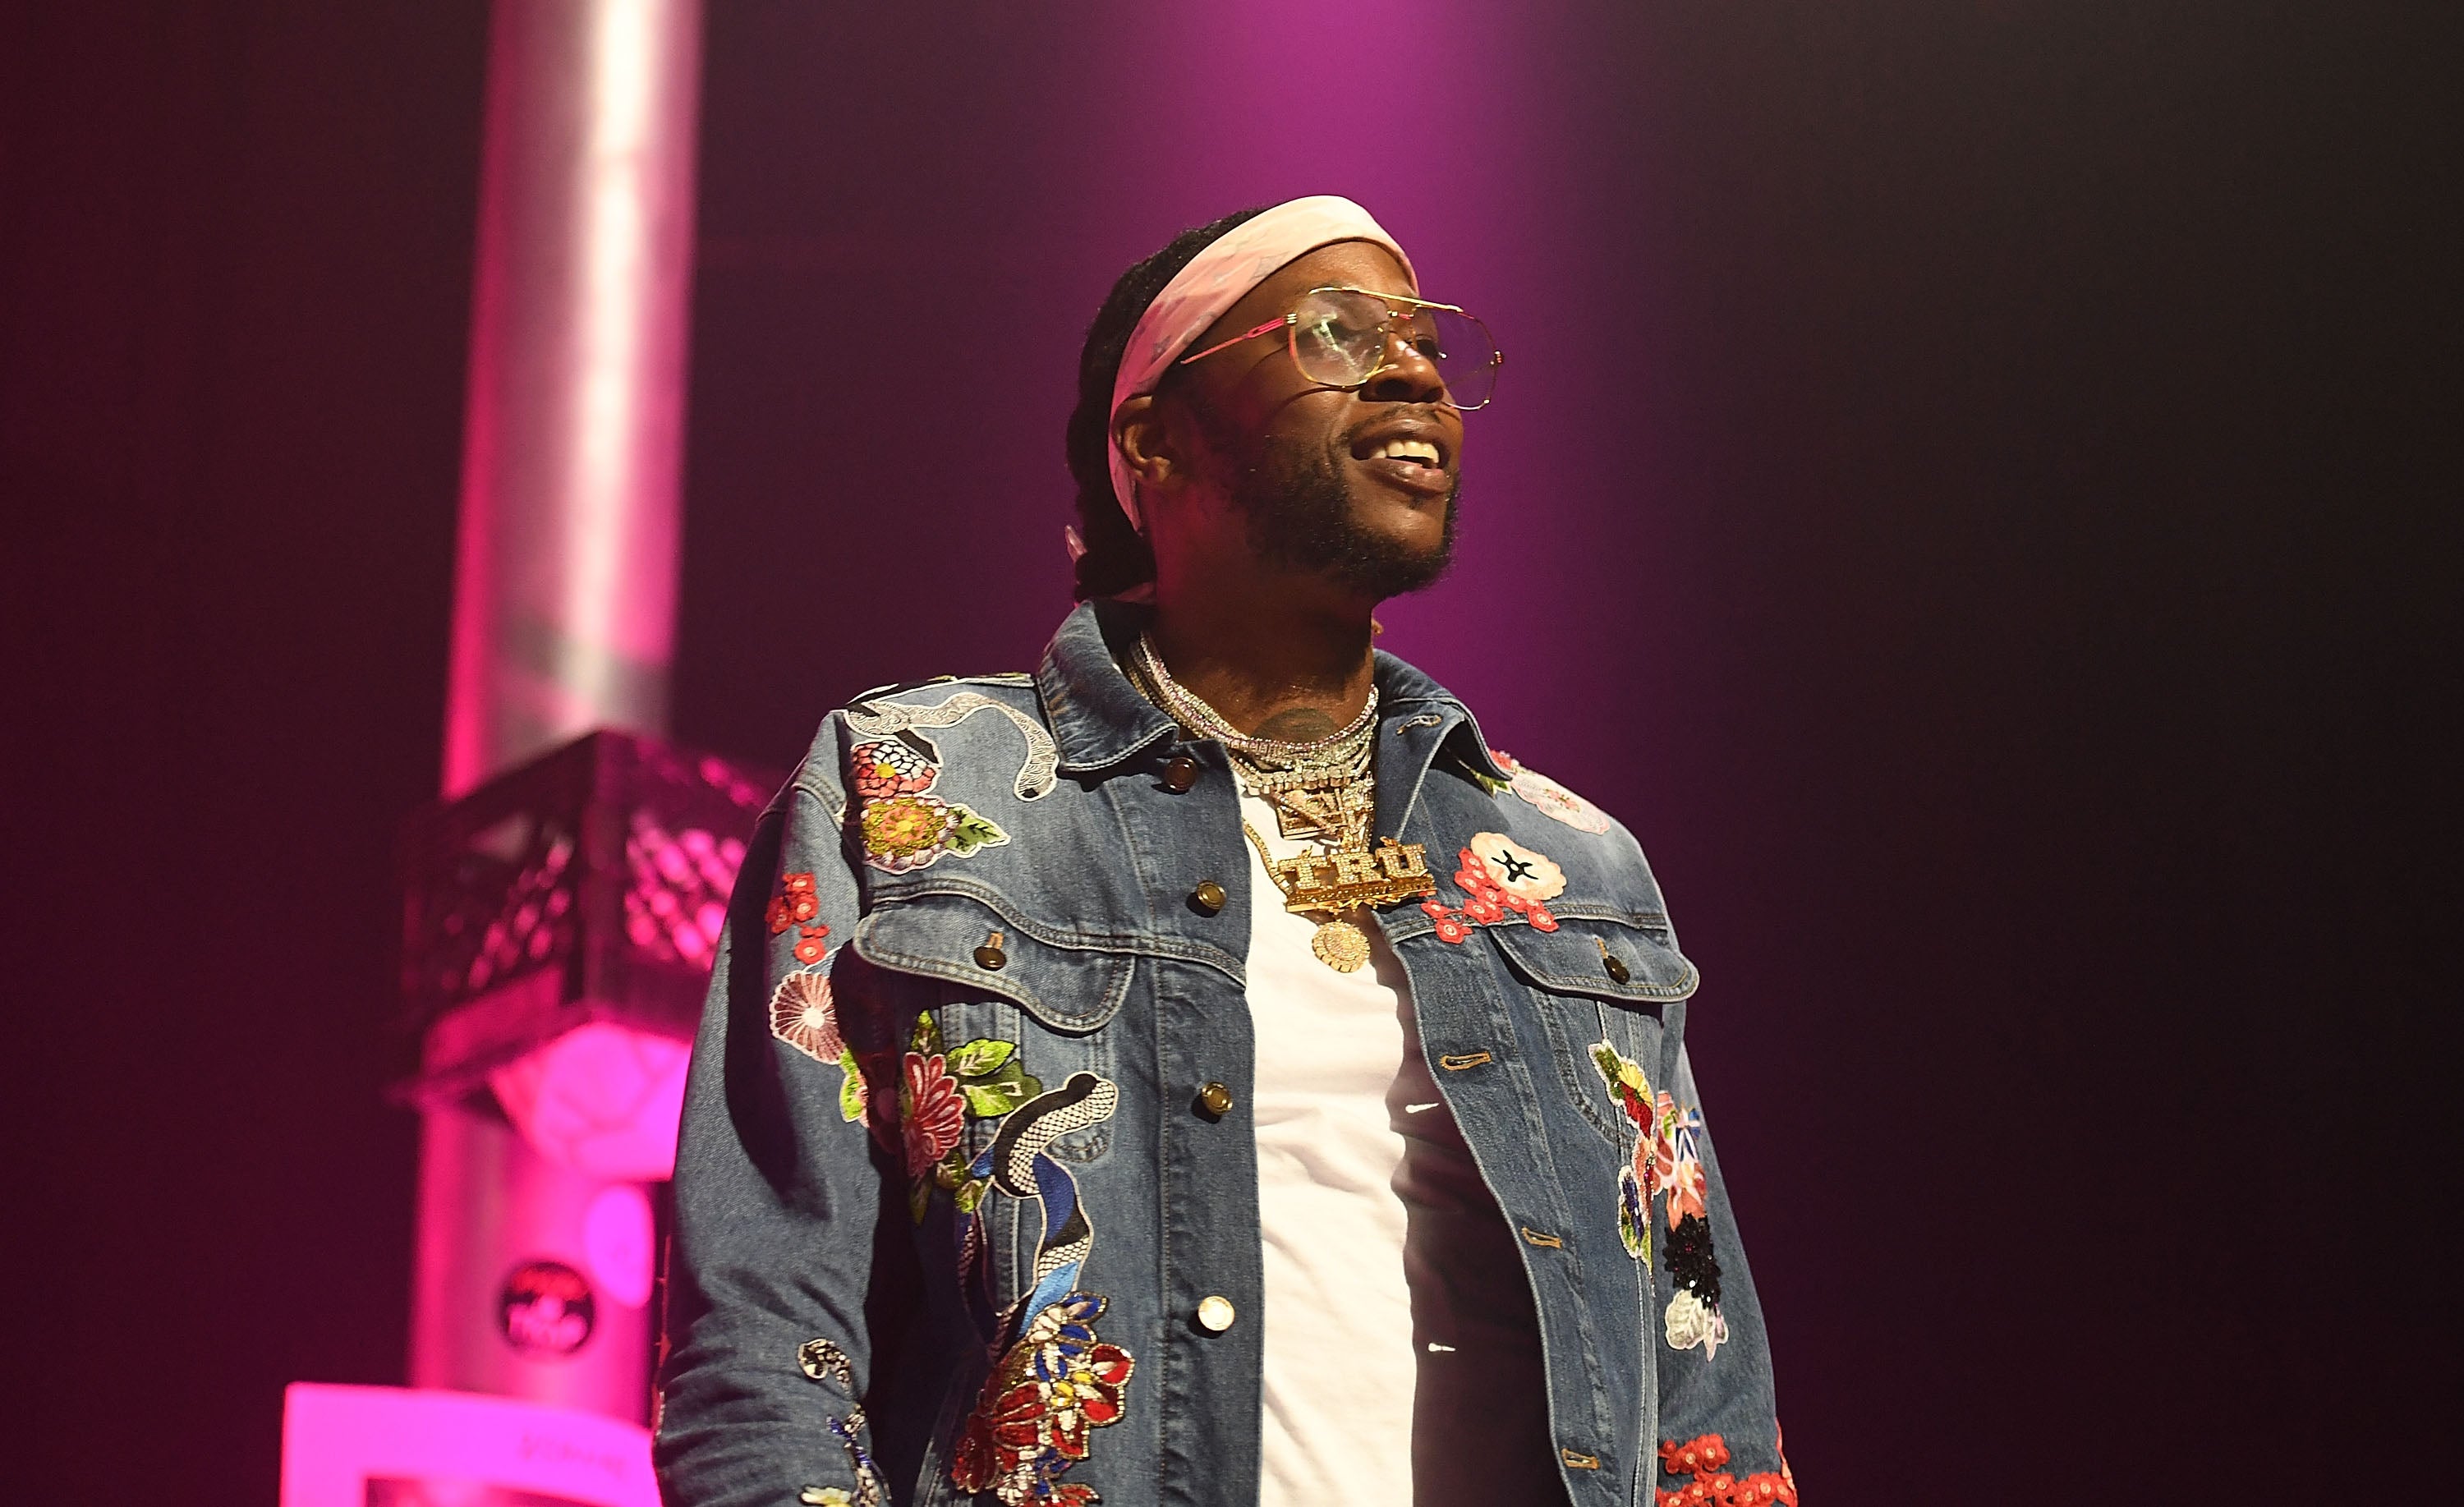 Too Cute: Watch 2 Chainz’s 5-Year-Old Daughter Rock the Mic Like Her Dad
